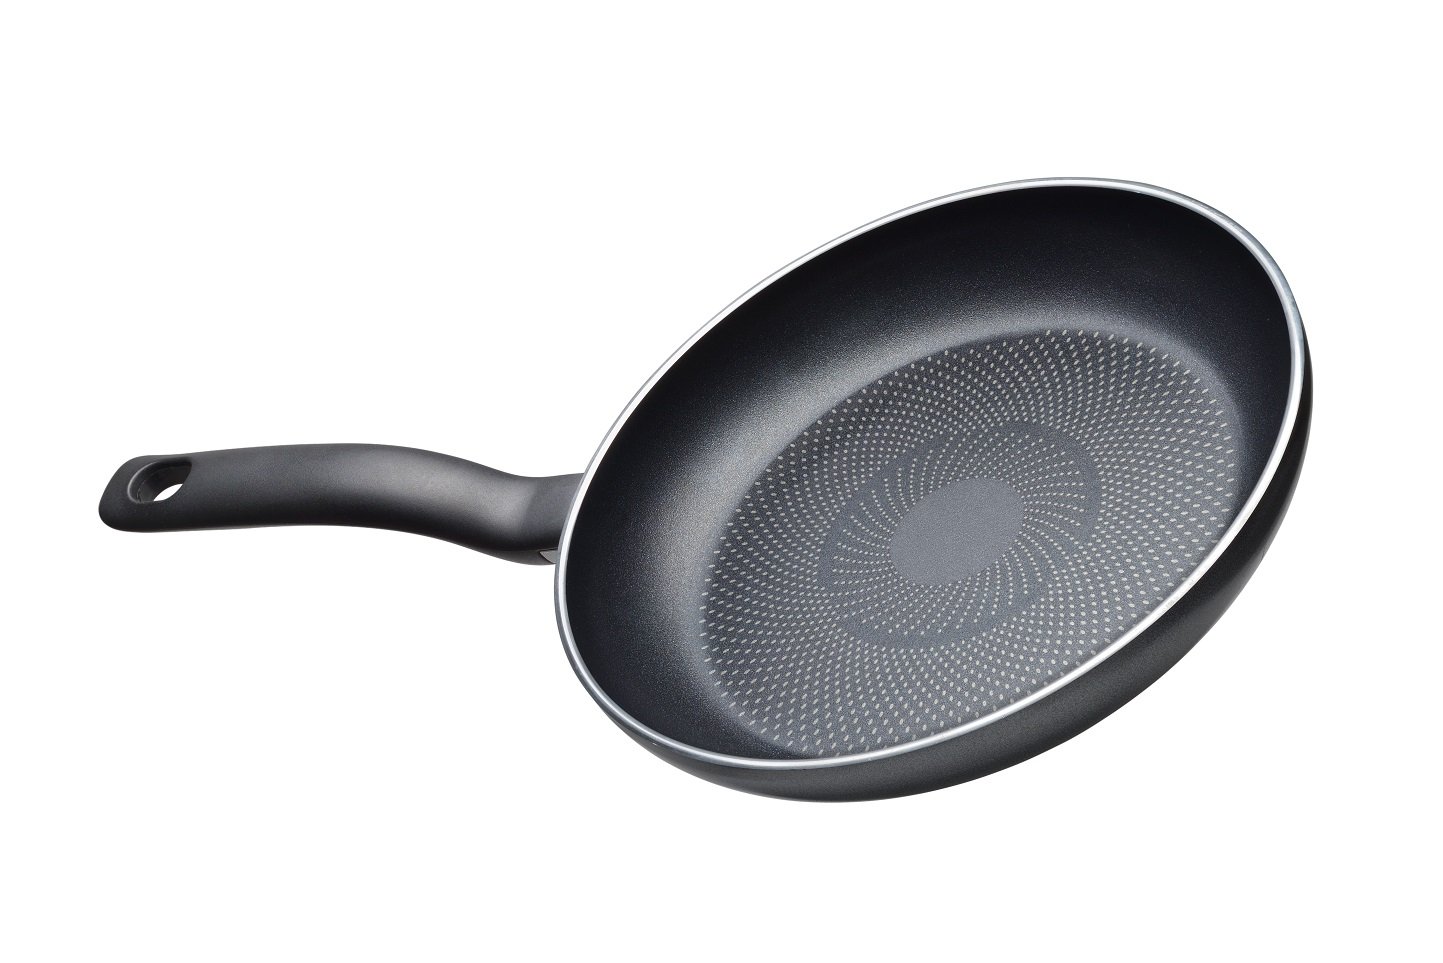 If my nonstick pans are scratched, do I need to throw them out?